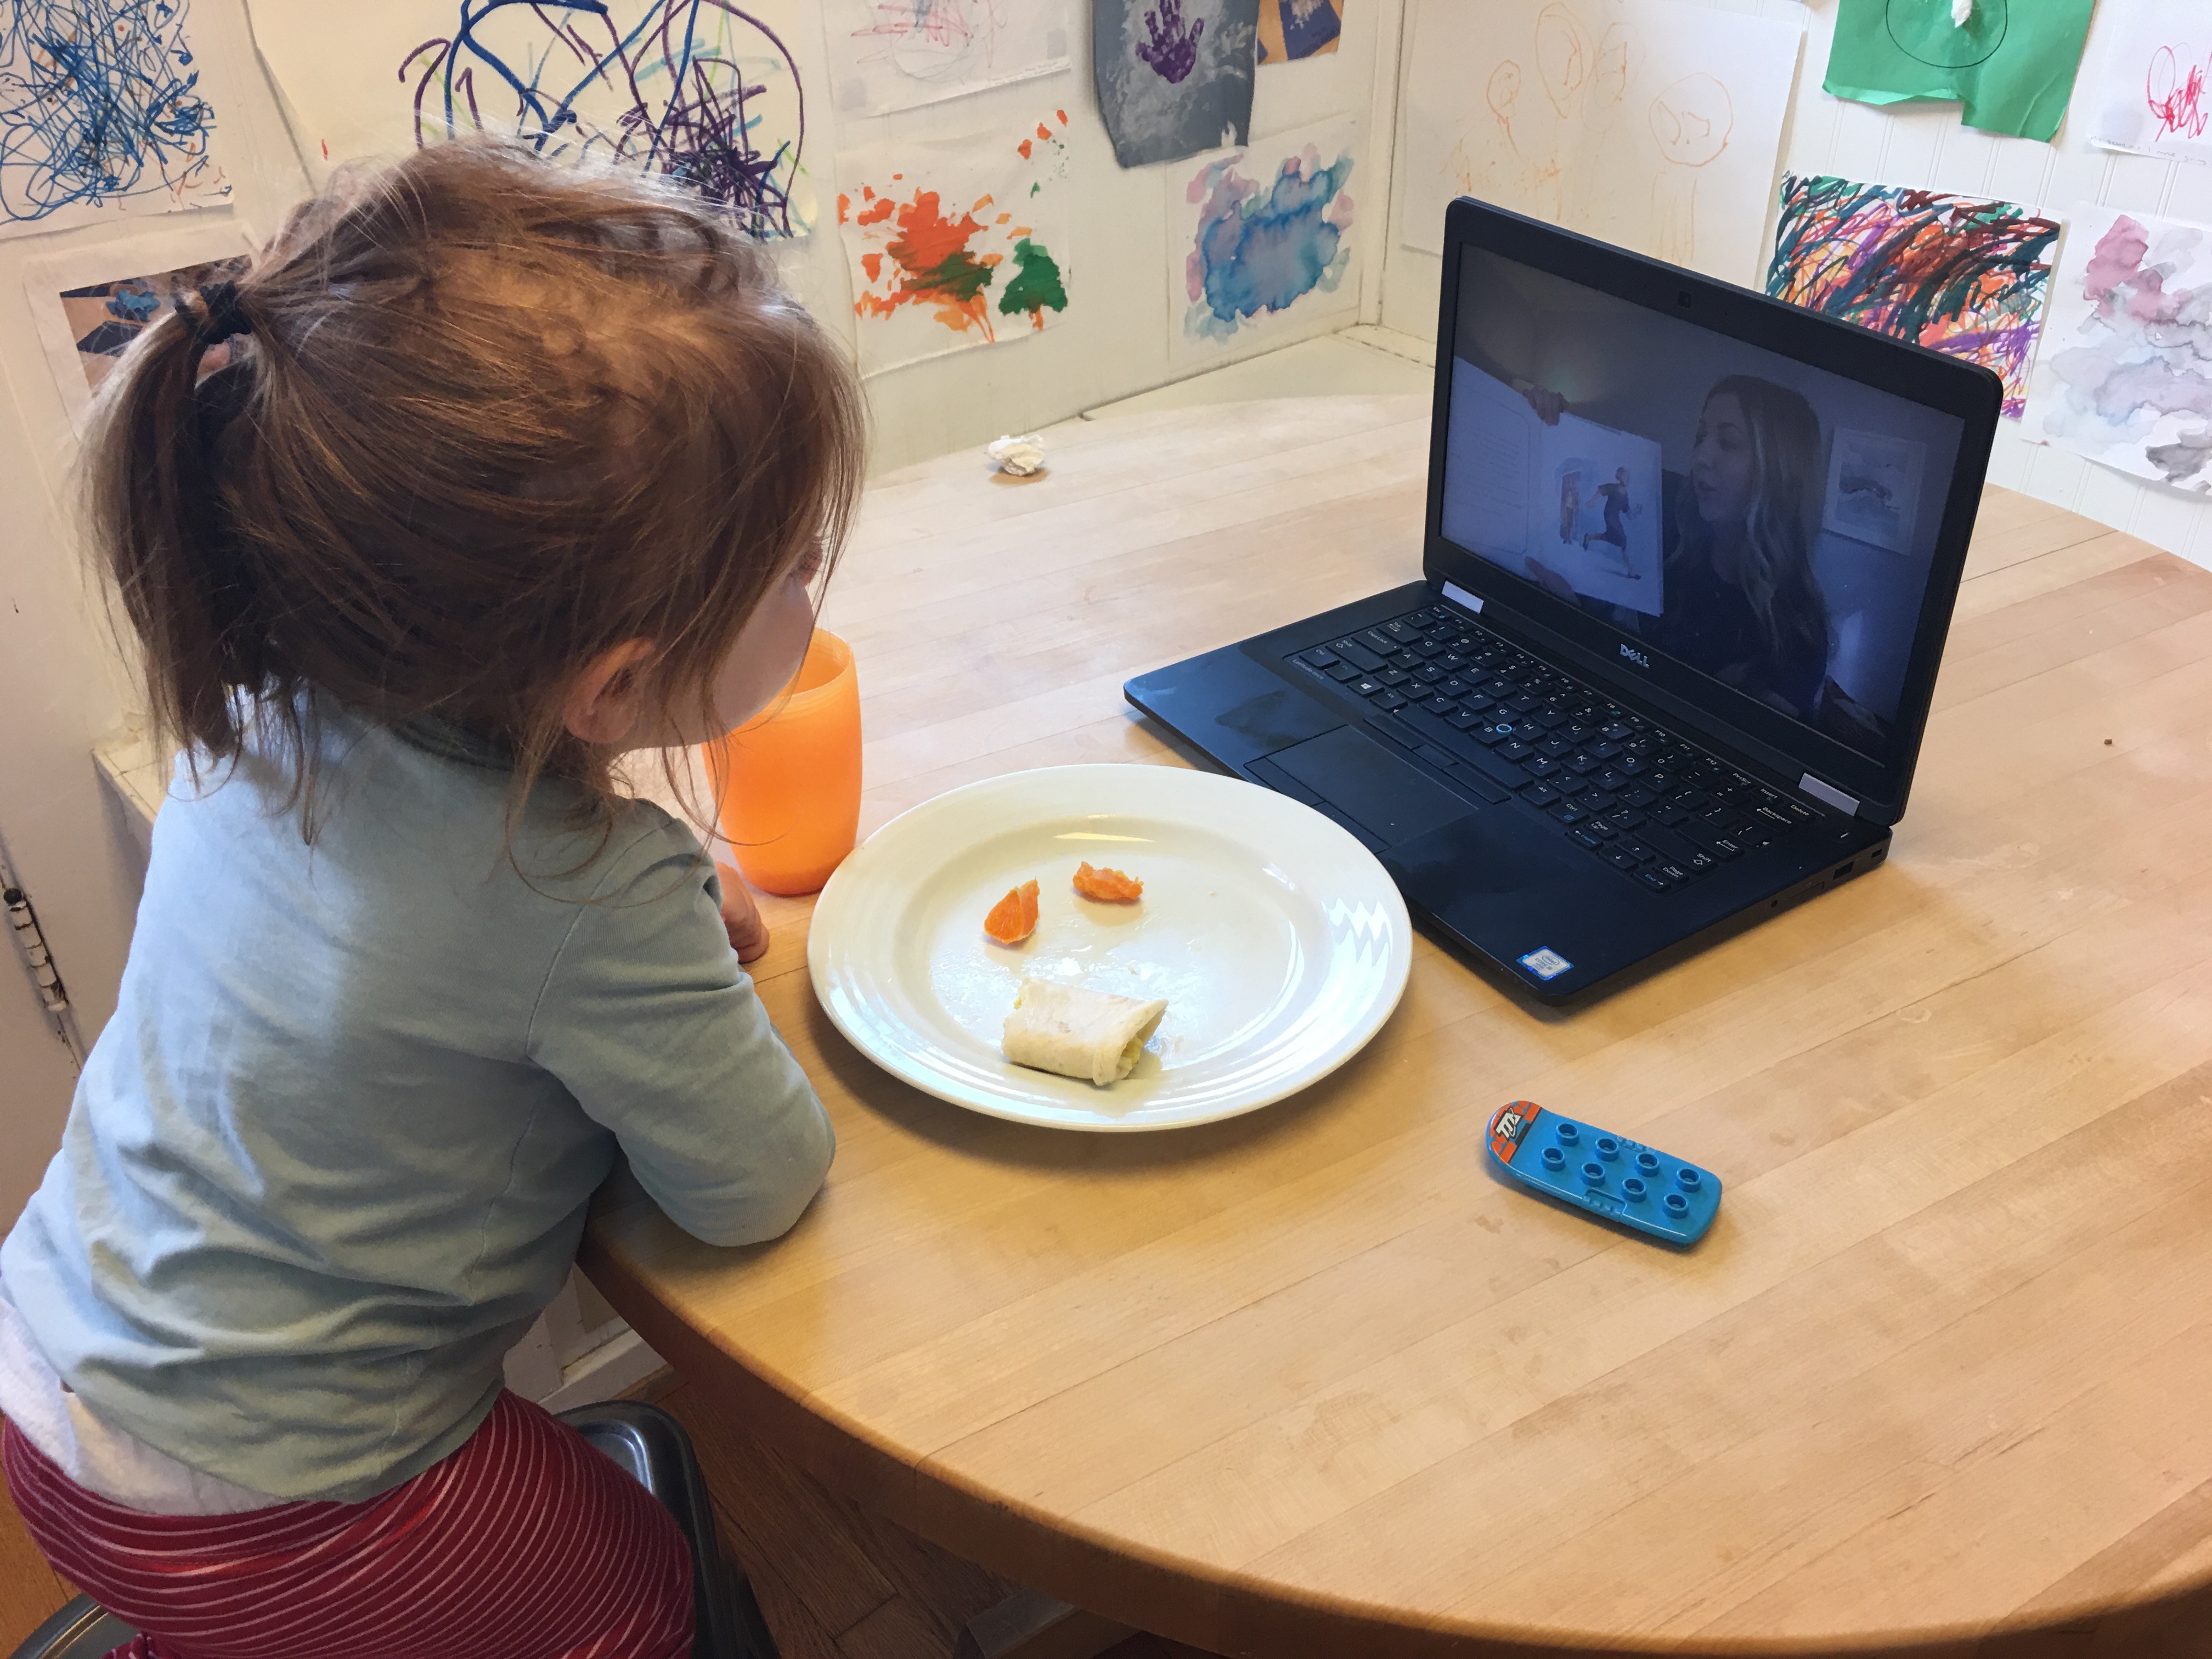 Teachers at The Acorn School continue to engage with Vanderbilt's youngest learners through Zoom, online singing activities, storytelling experiences and more (photo used with permission).